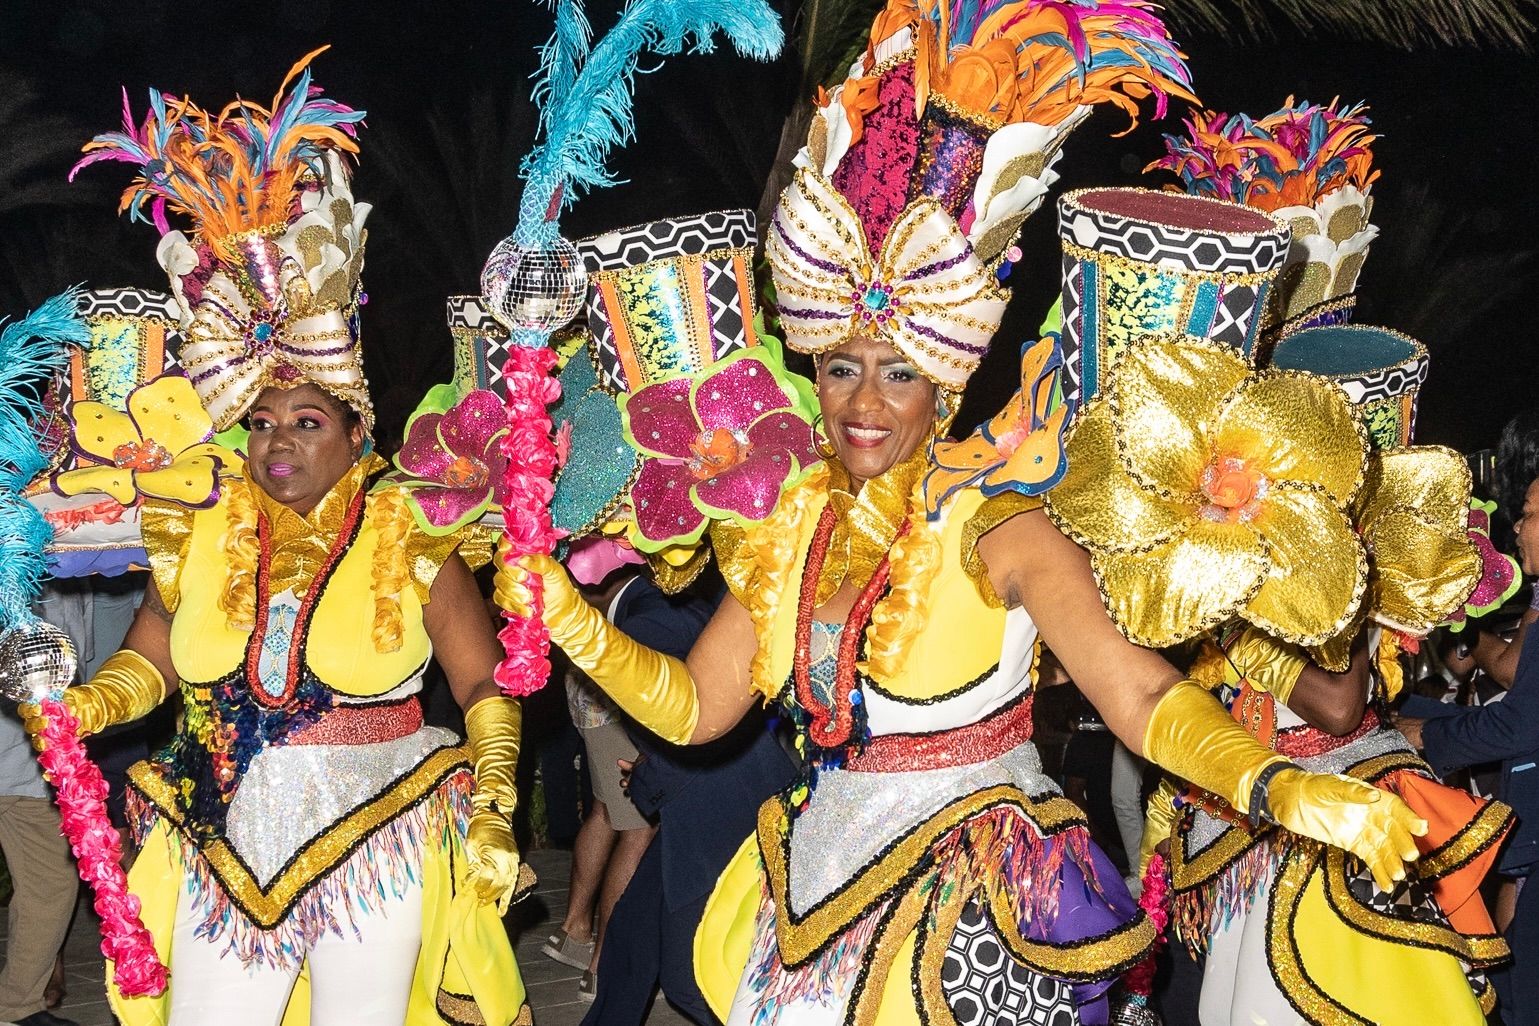 Carnival-performers--Dushi-Aventura--at-Sandals-Royal-Cura-ao-s-Grand-Opening-Celebration---Photo-Credit-John-Parra-Getty-Images-for-Sandals-Resorts